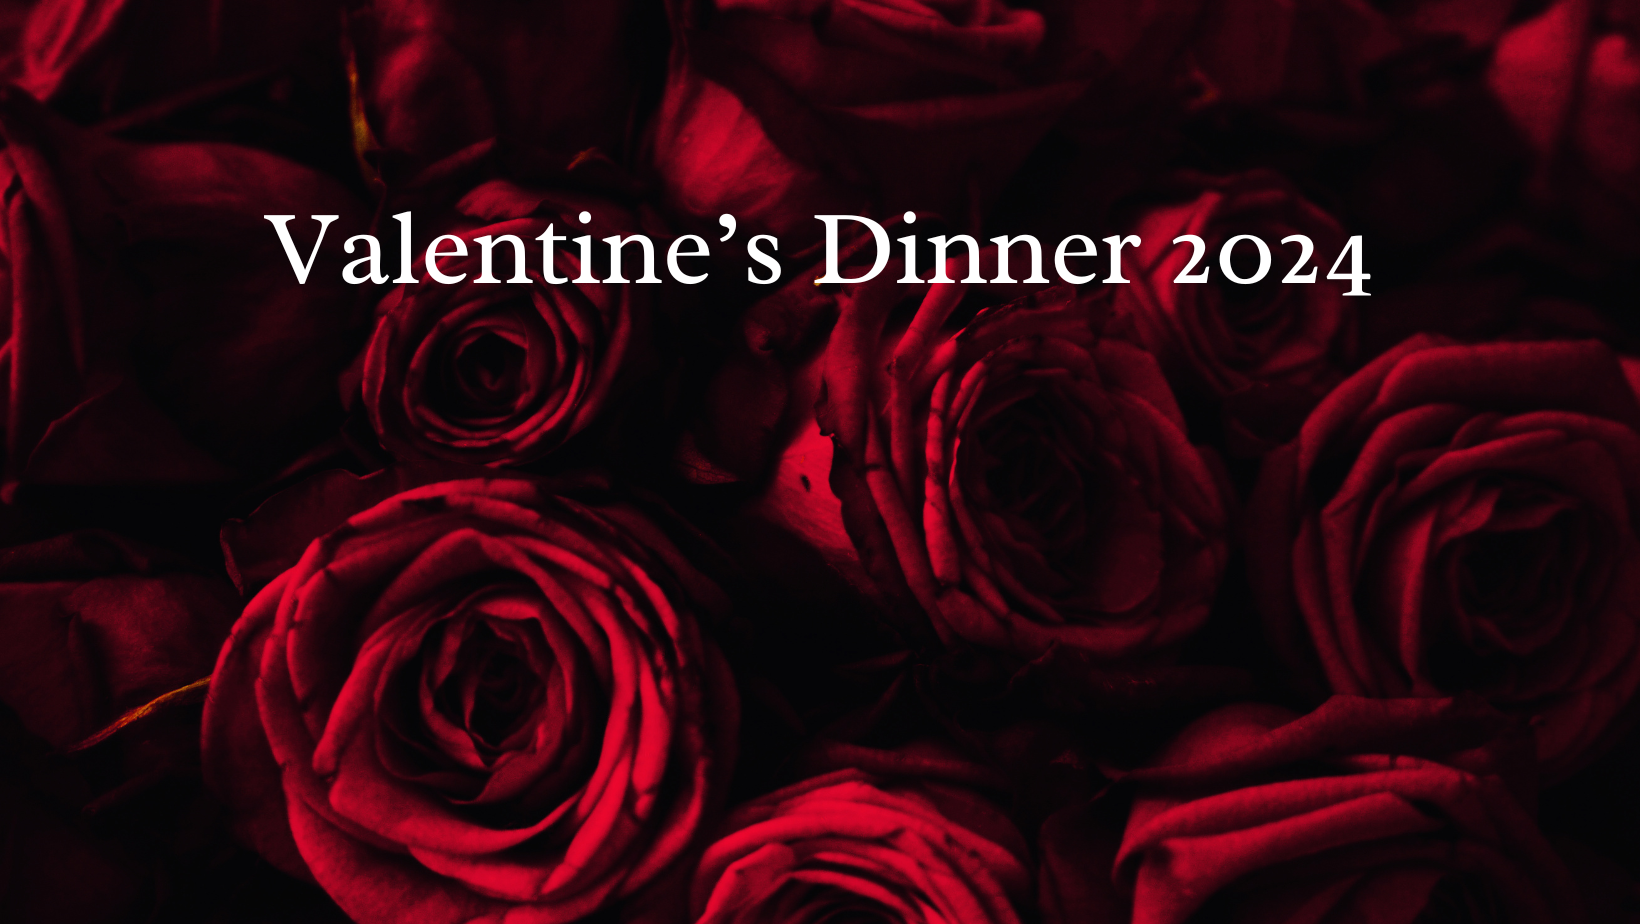 Valentine's Dinner 2024 with a bunch of red roses